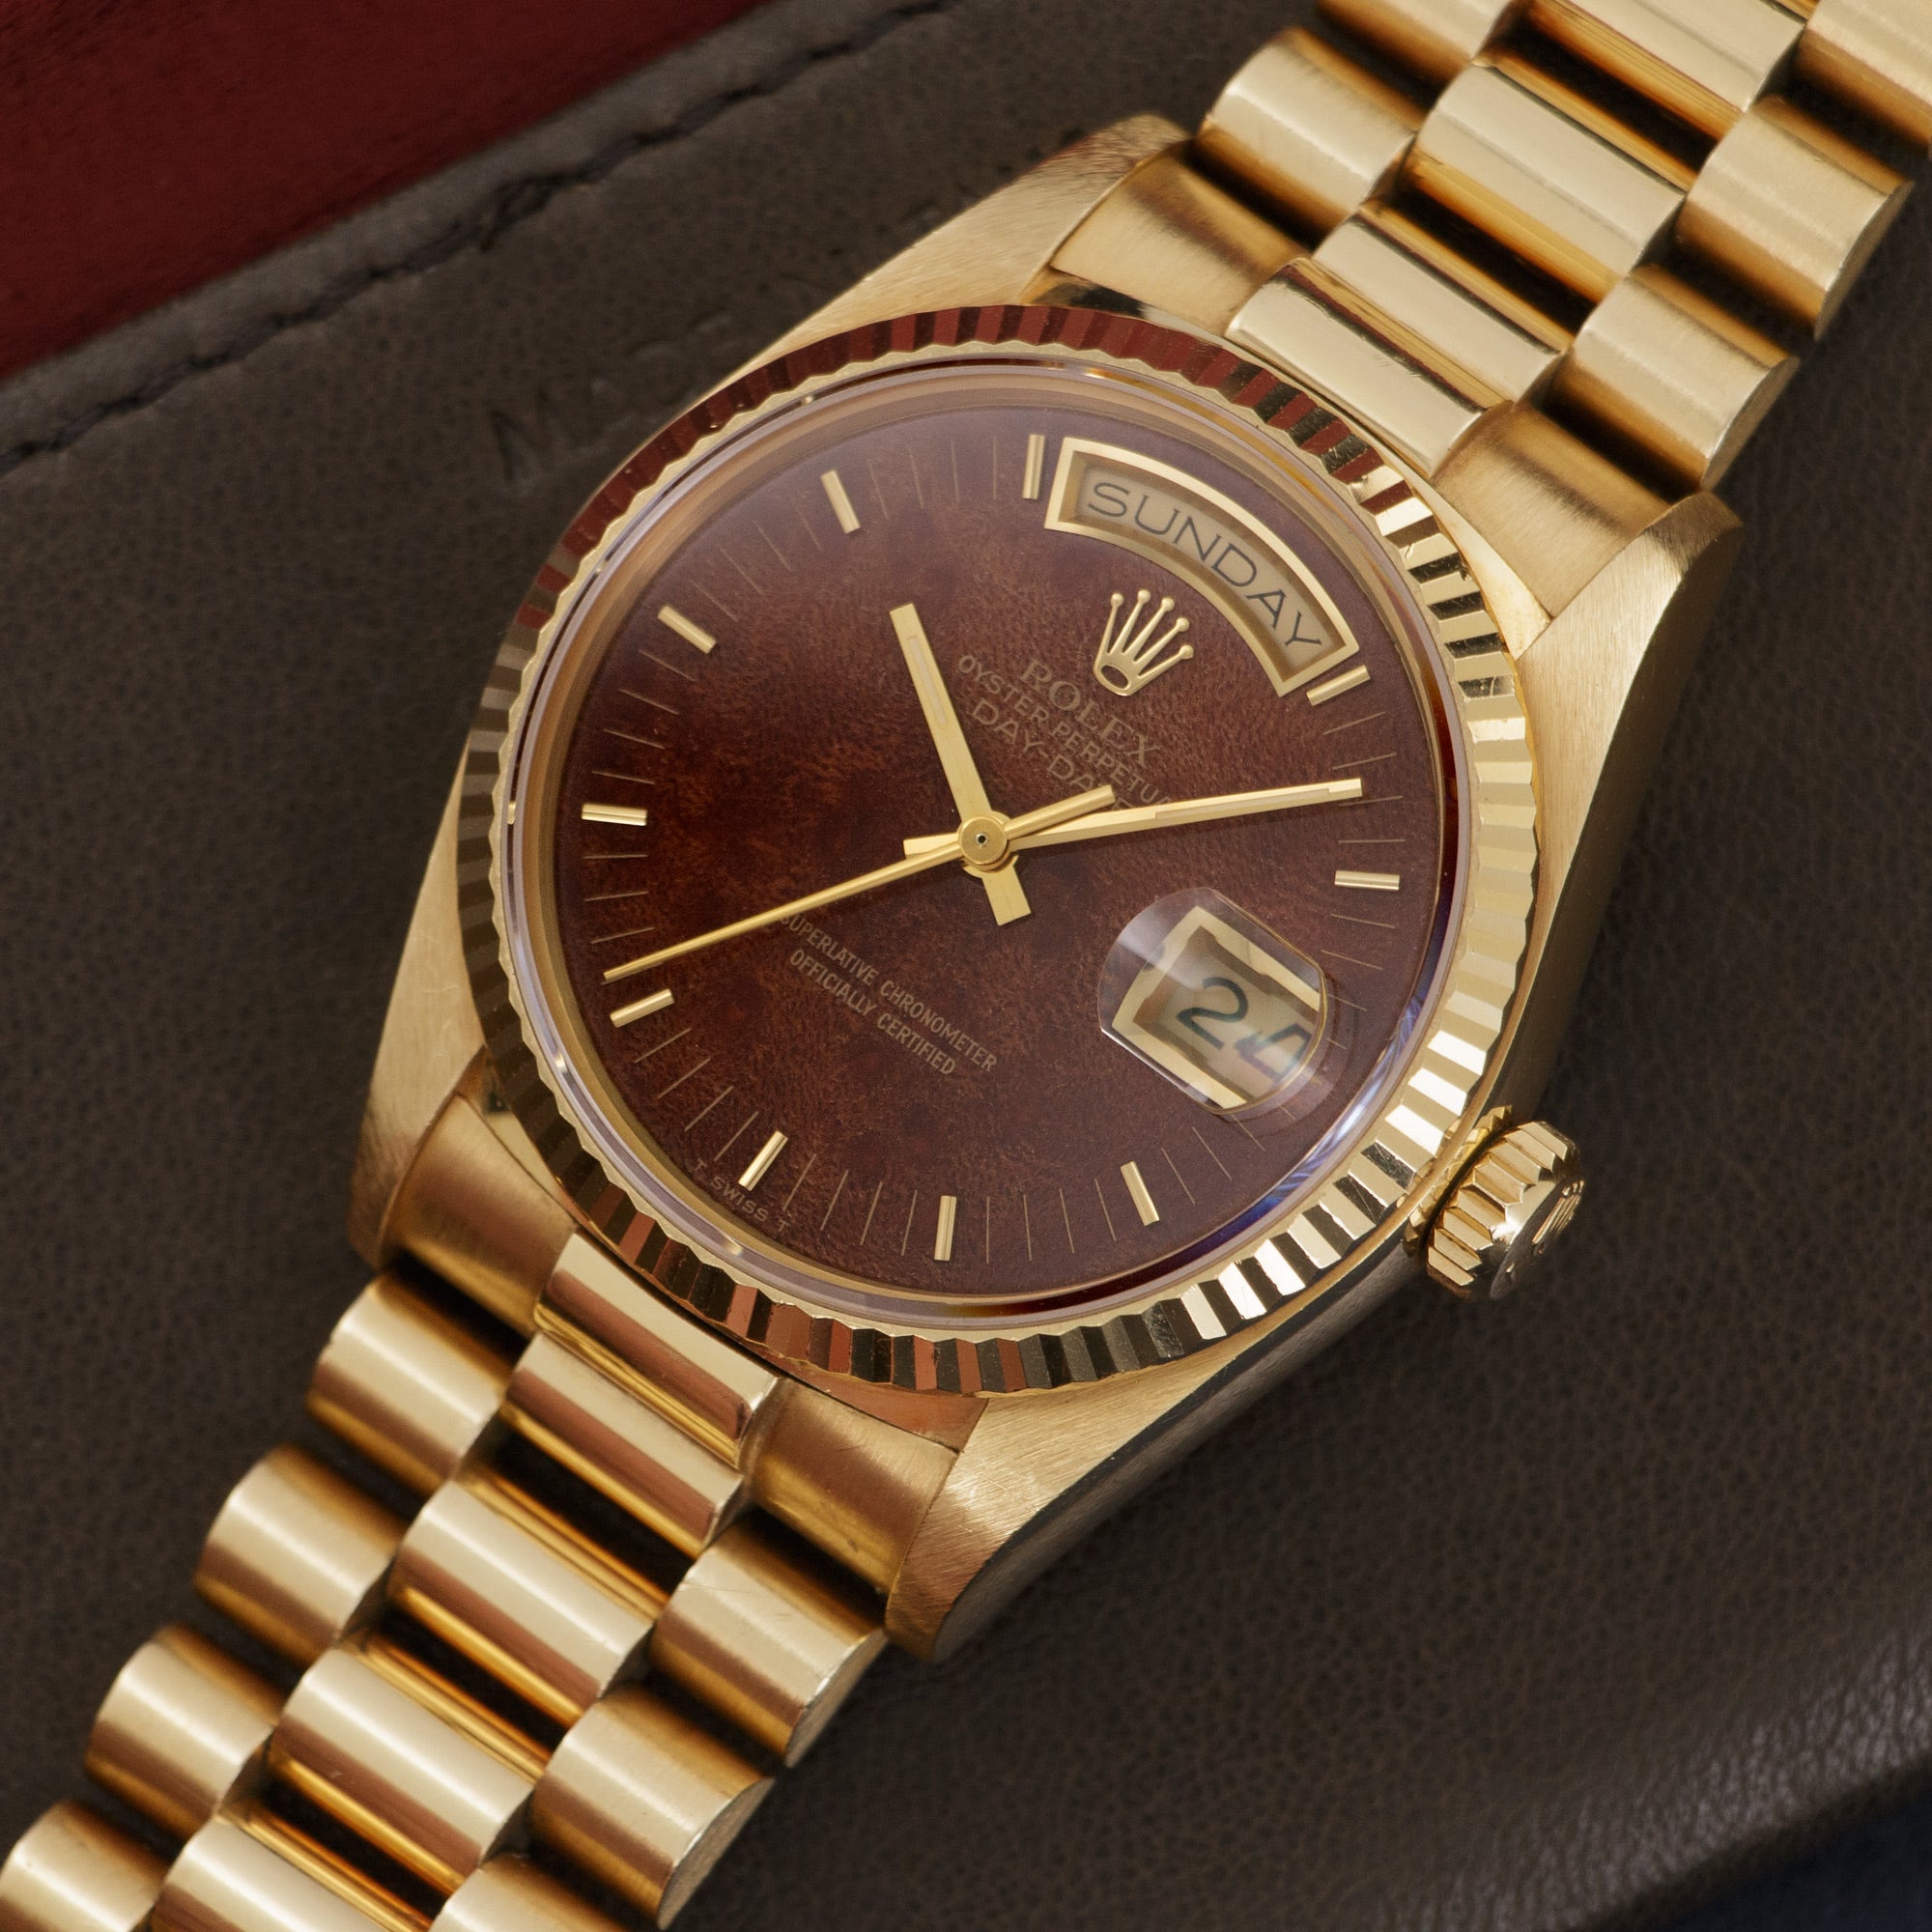 Rolex - Rolex Yellow Gold Day-Date Wood Dial Watch Ref. 18038 - The Keystone Watches